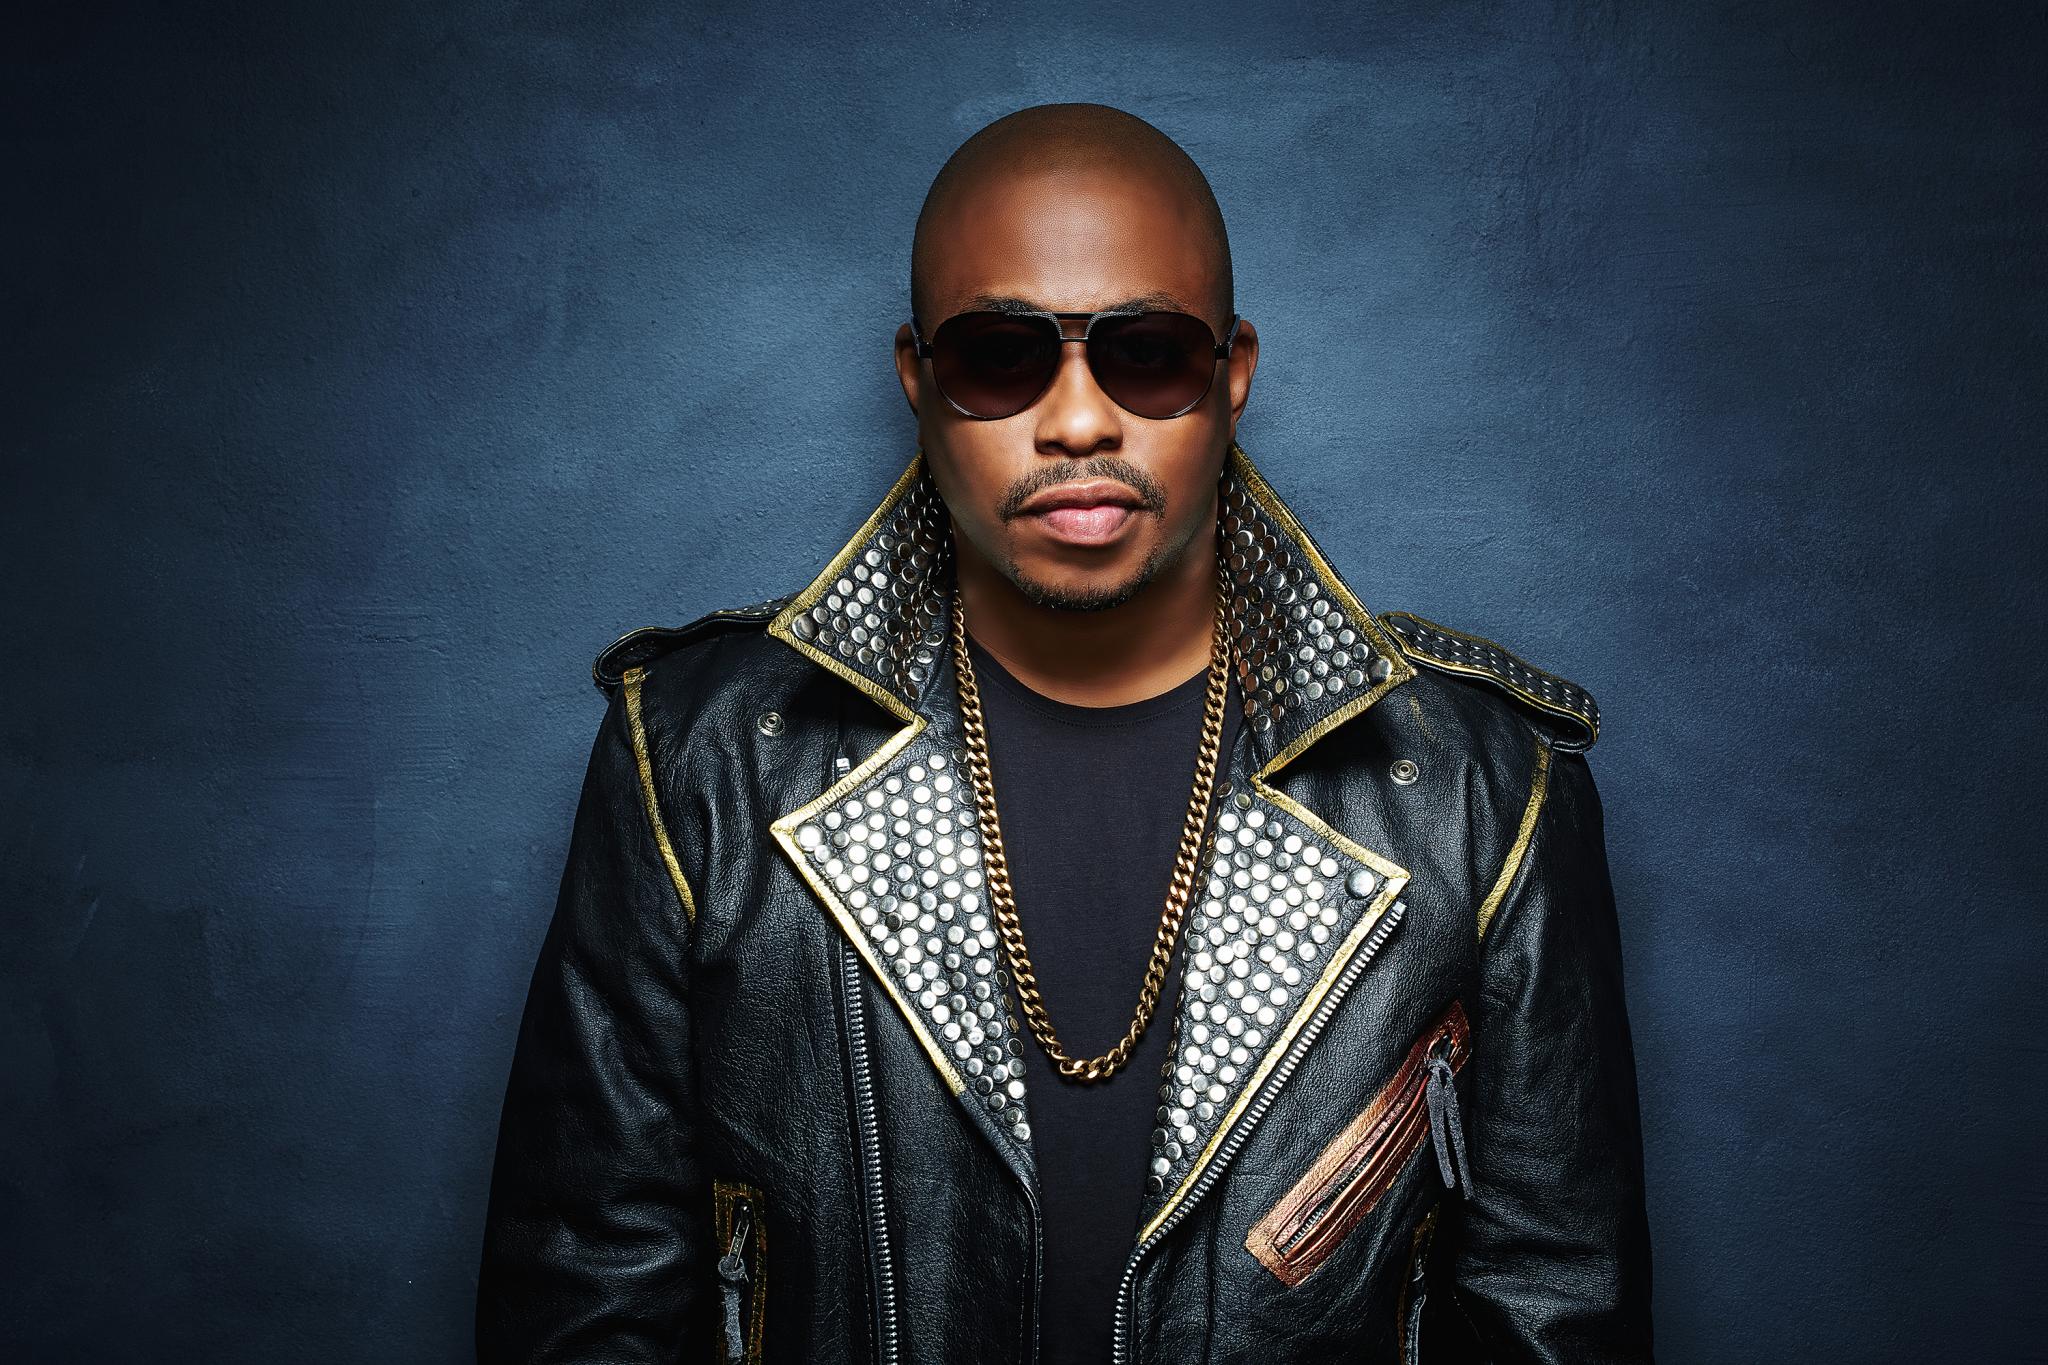 Raheem DeVaughn Celebrates Love And Happiness With 'What It Feels Like"